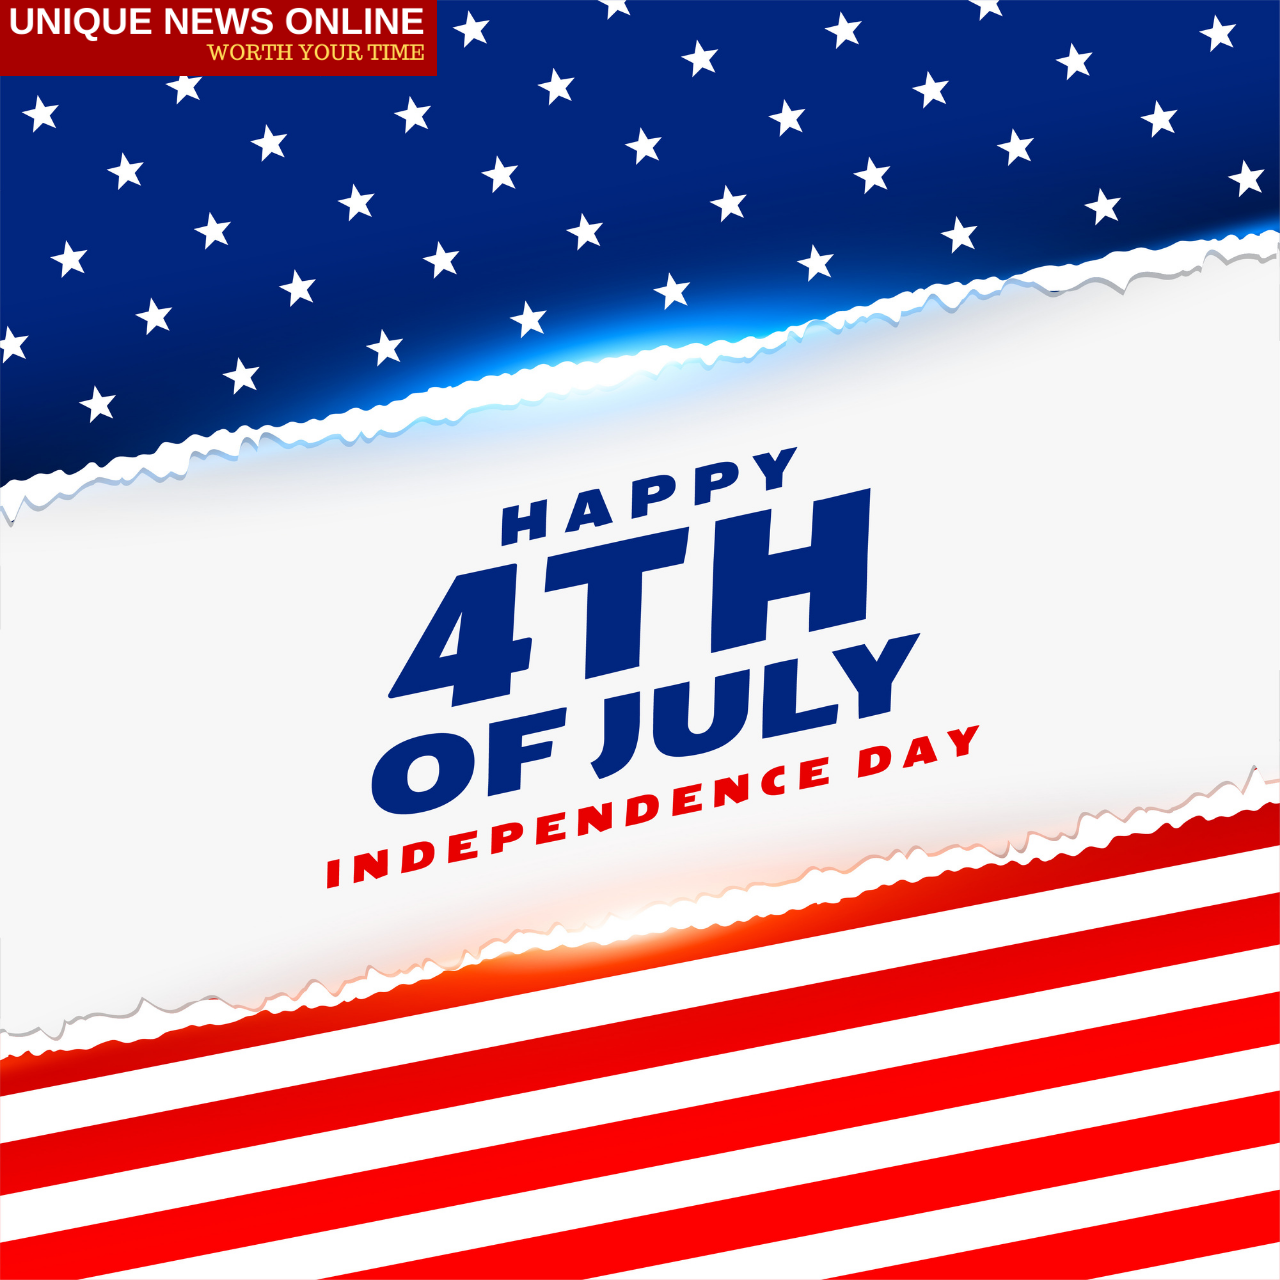 Happy Fourth Of July 2021: Wishes, Quotes, Messages, Greetings, HD Images, Wallpaper, and Clipart for Twitter, Instagram, or Facebook